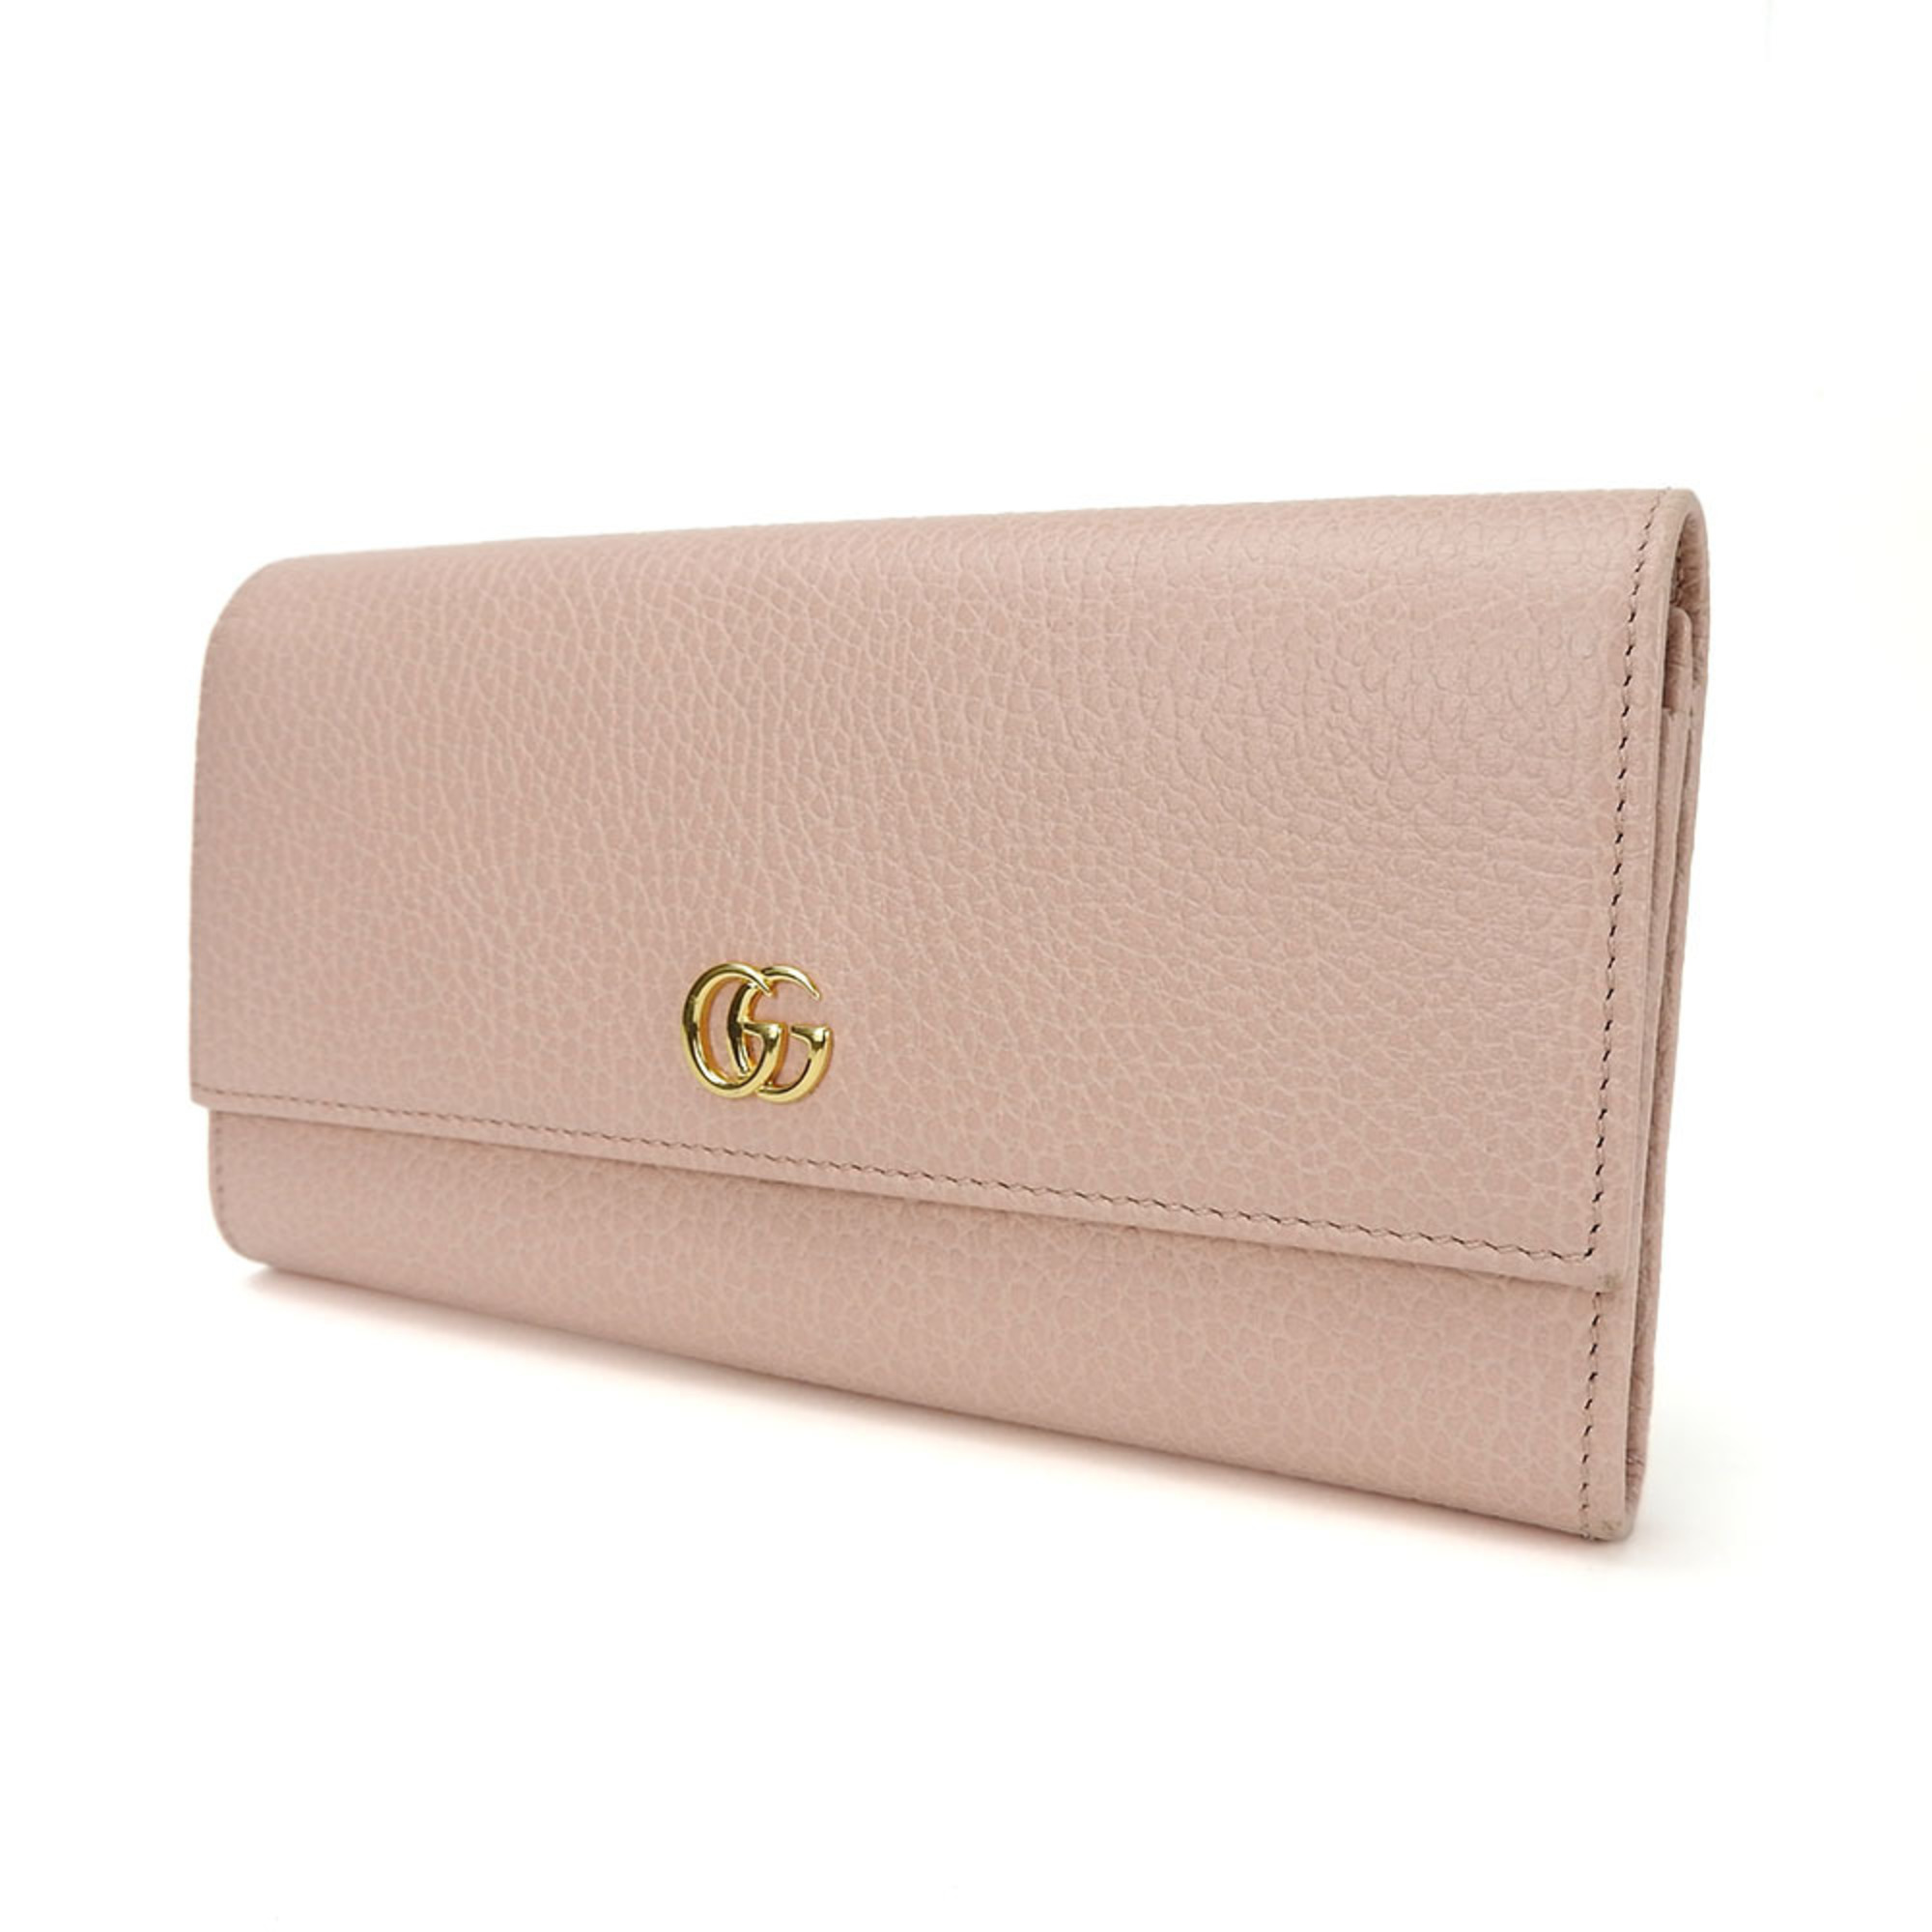 Gucci bi-fold long wallet 456116 GG Marmont leather pink accessory ladies GUCCI